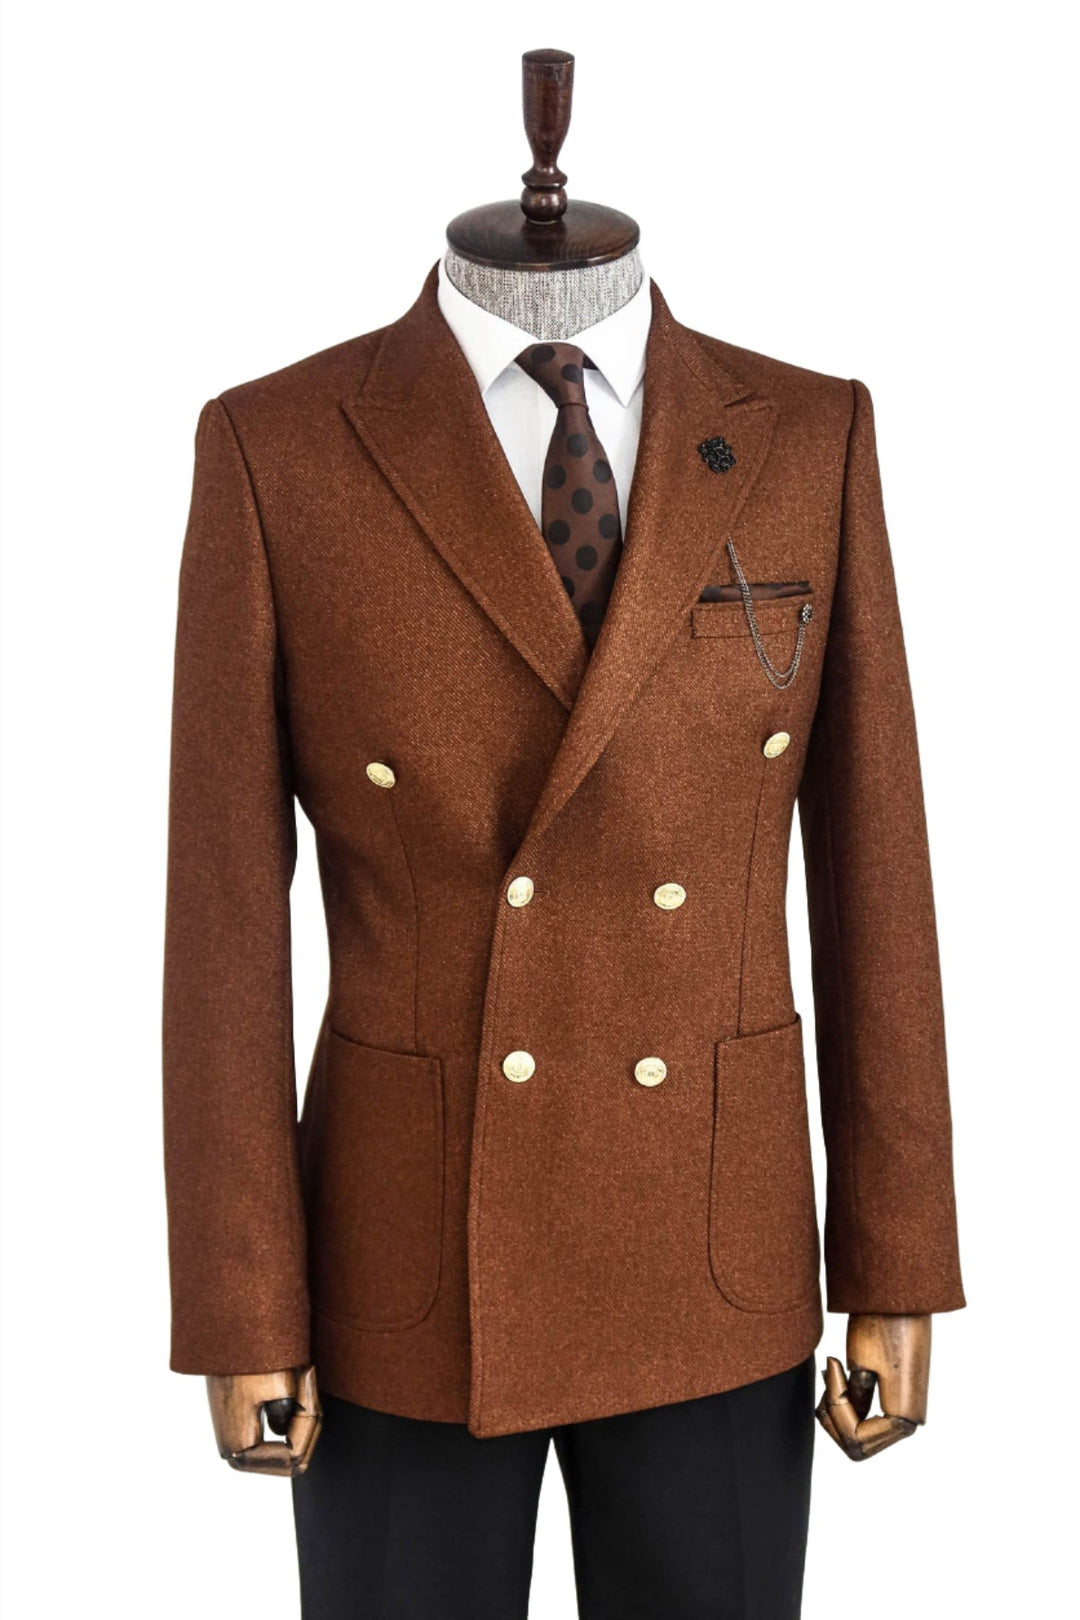 Double Breasted Slim Fit Brown Men Blazer - Wessi